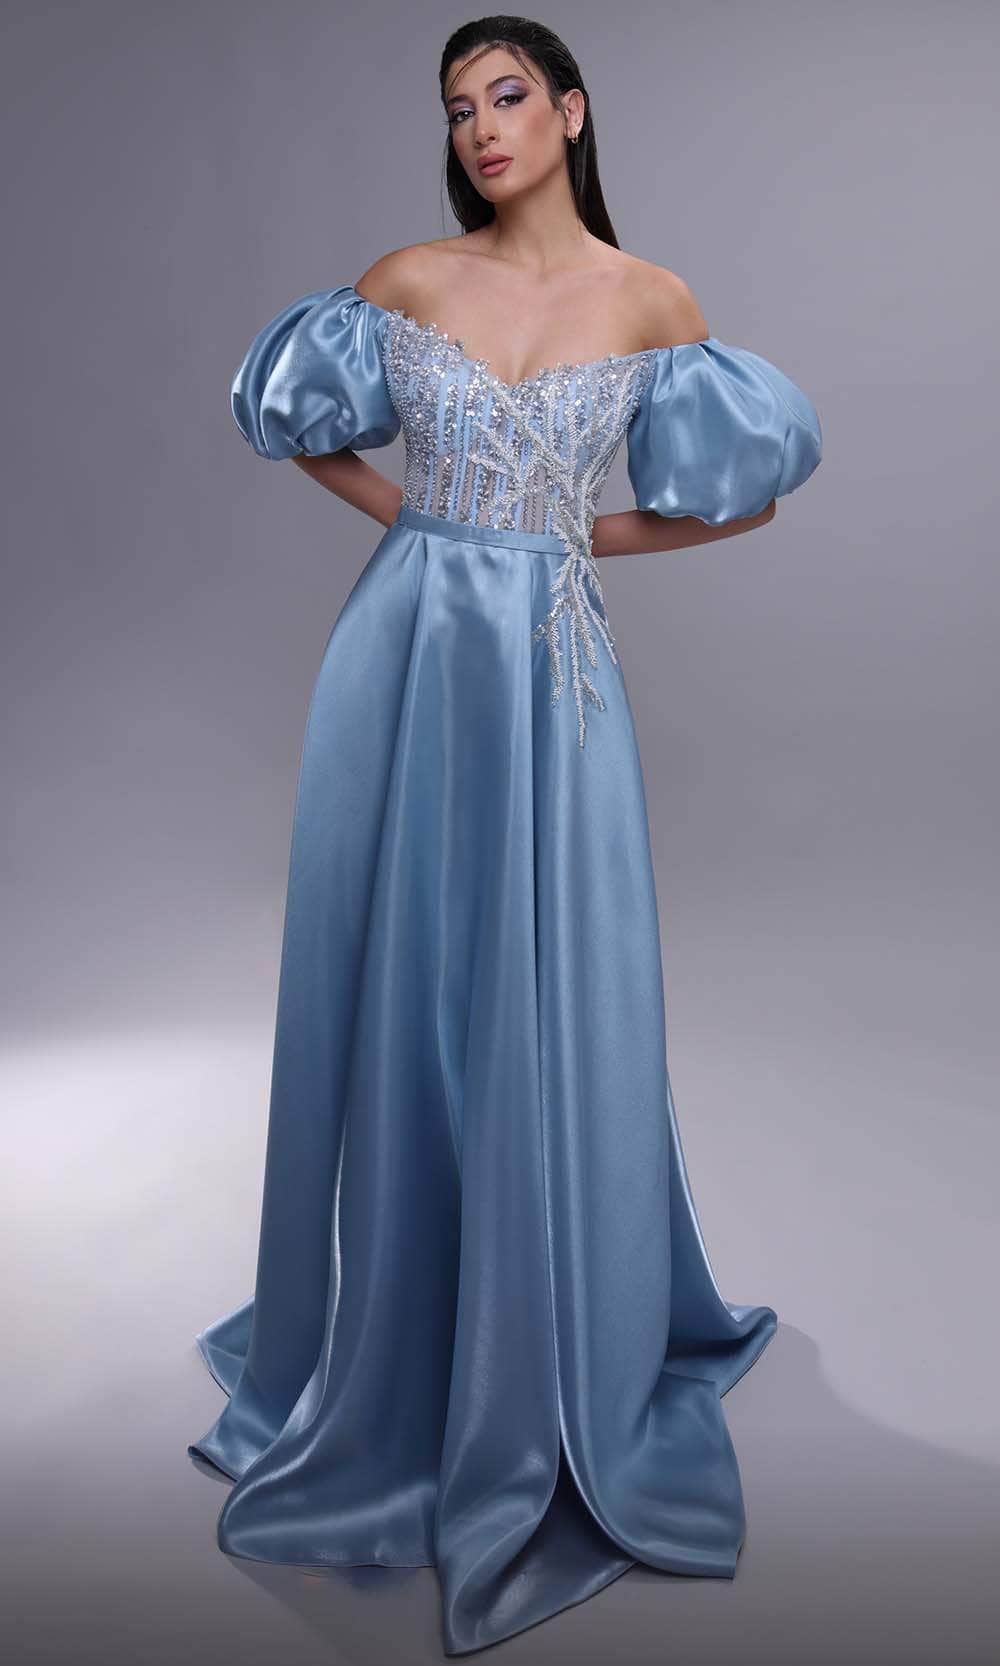 Image of MNM Couture K4079 - Puff Sleeve Corset Evening Dress